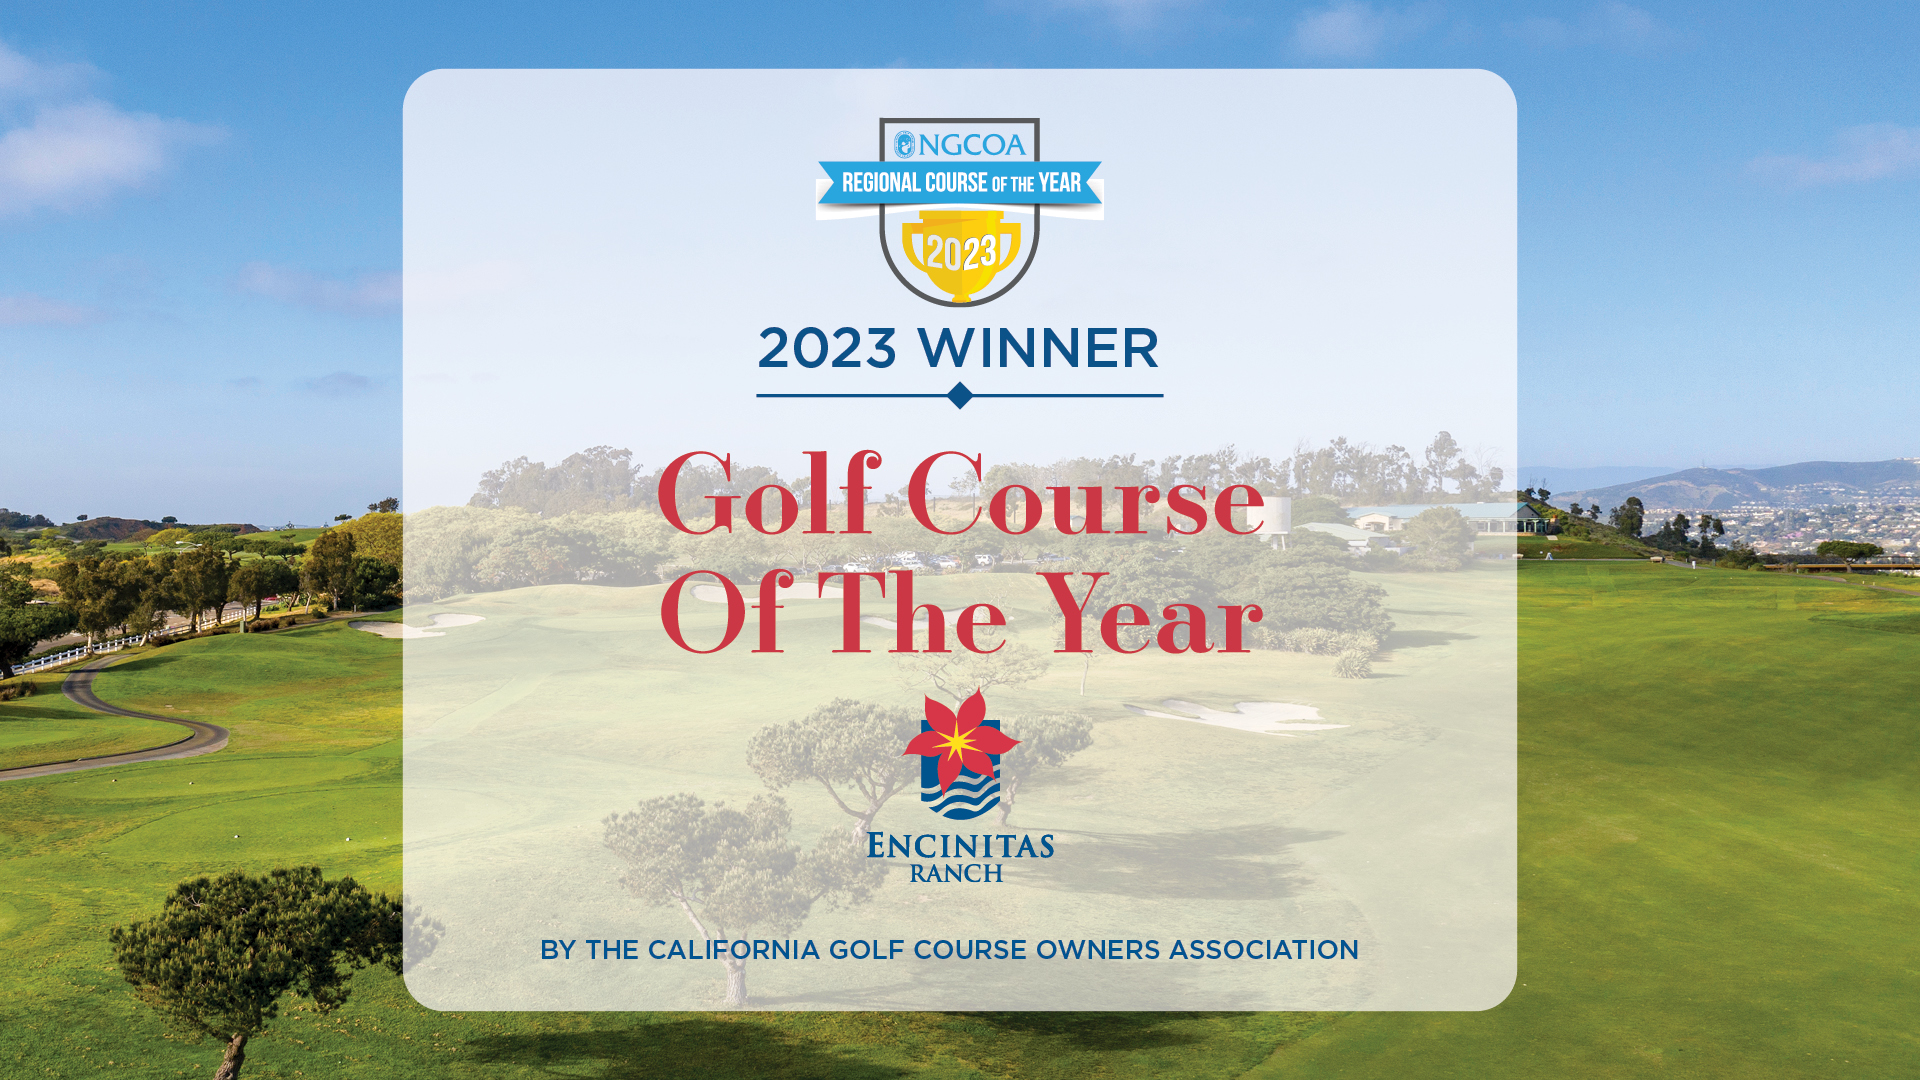 2023 Western Region Course of the Year Award by the National Golf Course Owners Association